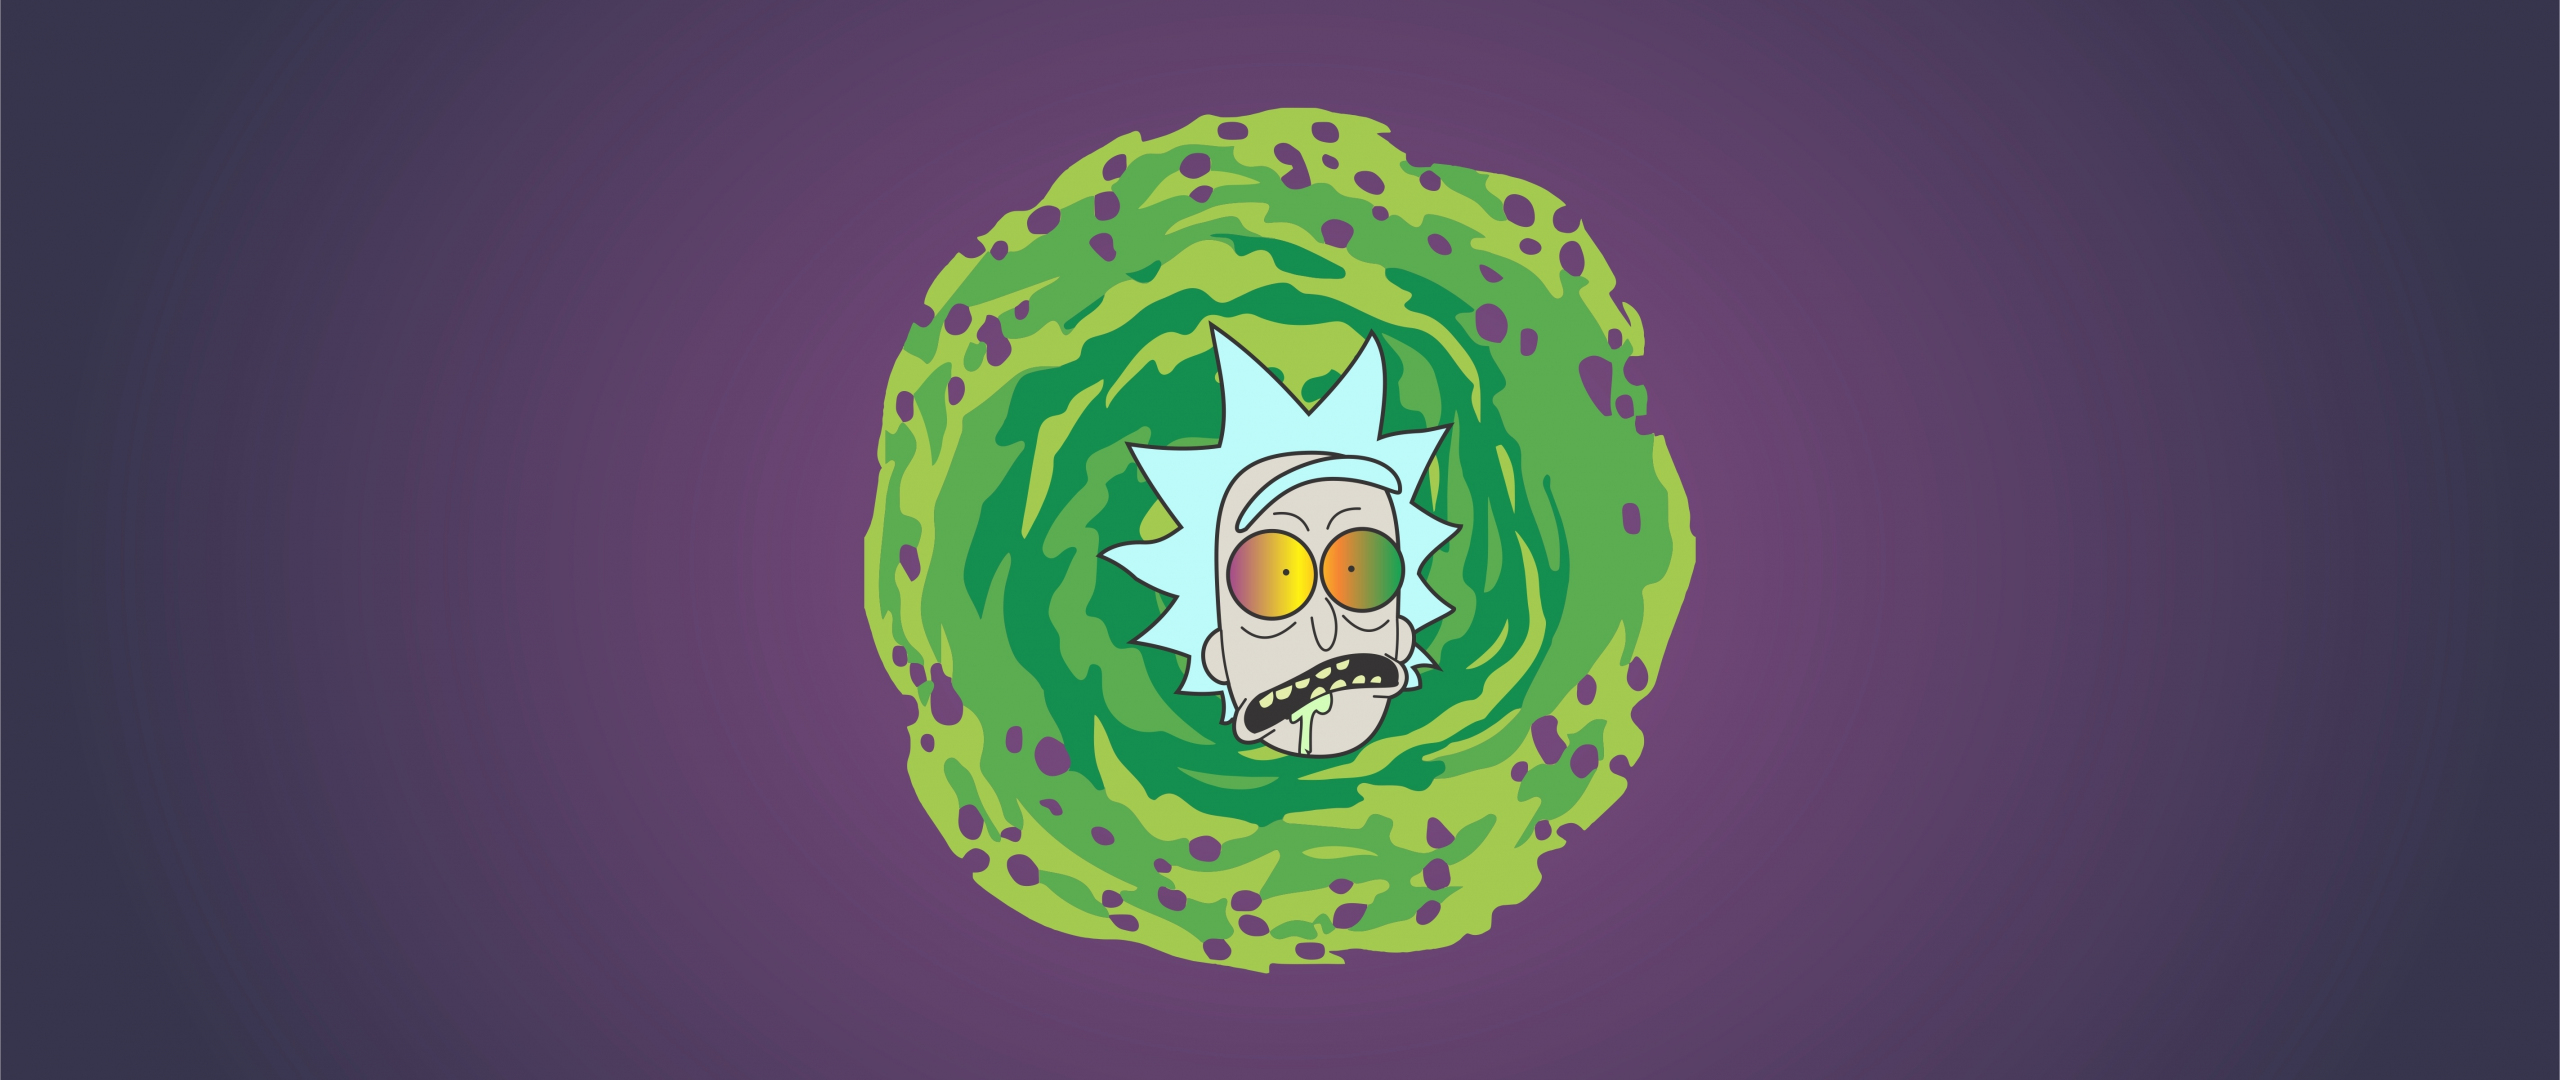  Rick and Morty Ultra HD Wallpapers for UHD,  Widescreen, UltraWide & Multi Display Desktop, Tablet & Smartphone